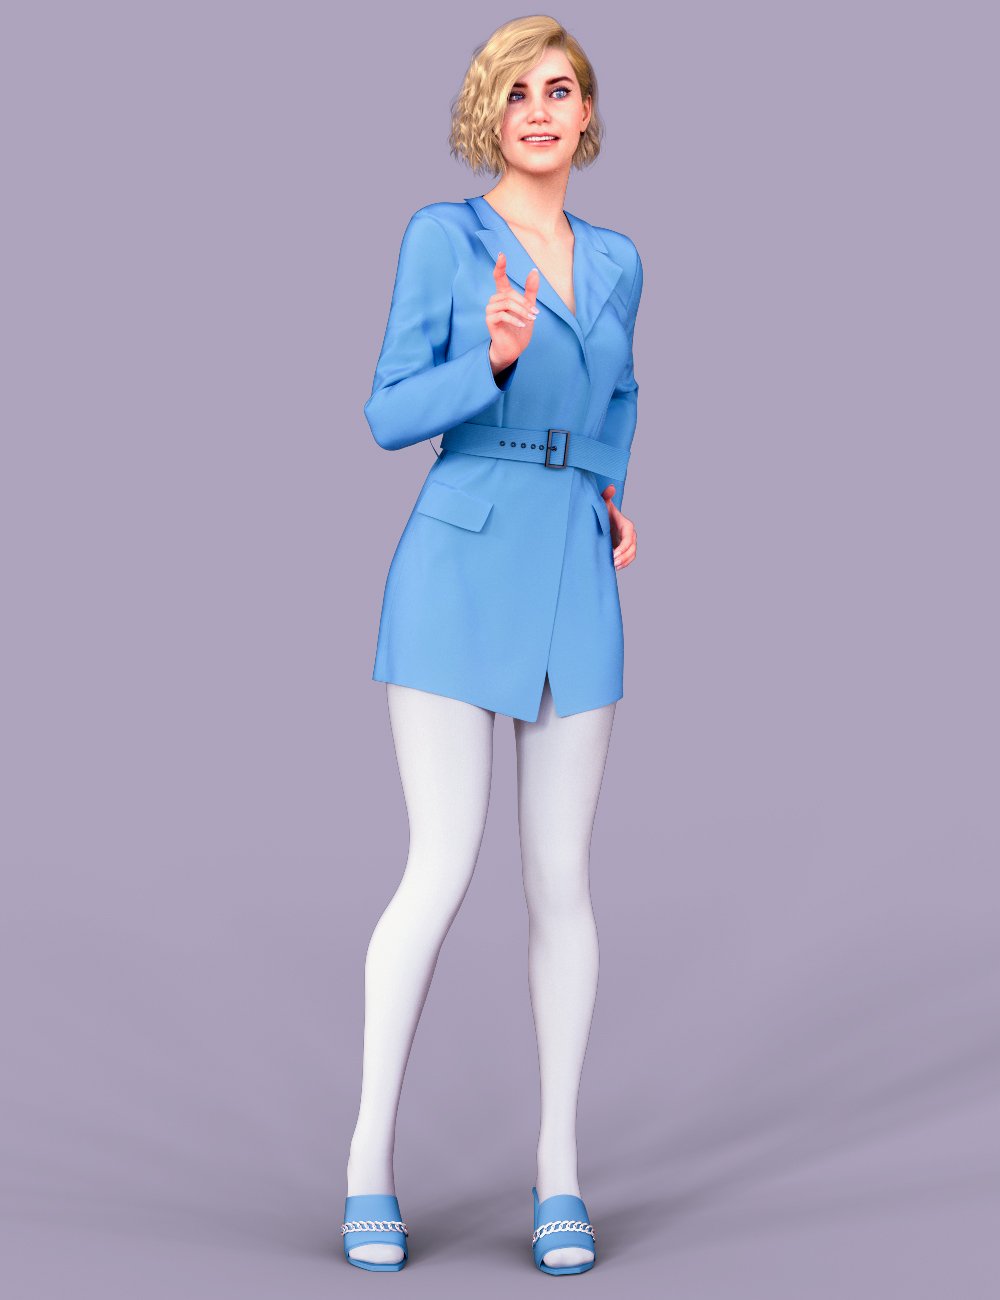 dForce GI Outfit for Genesis 8 and 8.1 Females by: chungdan, 3D Models by Daz 3D